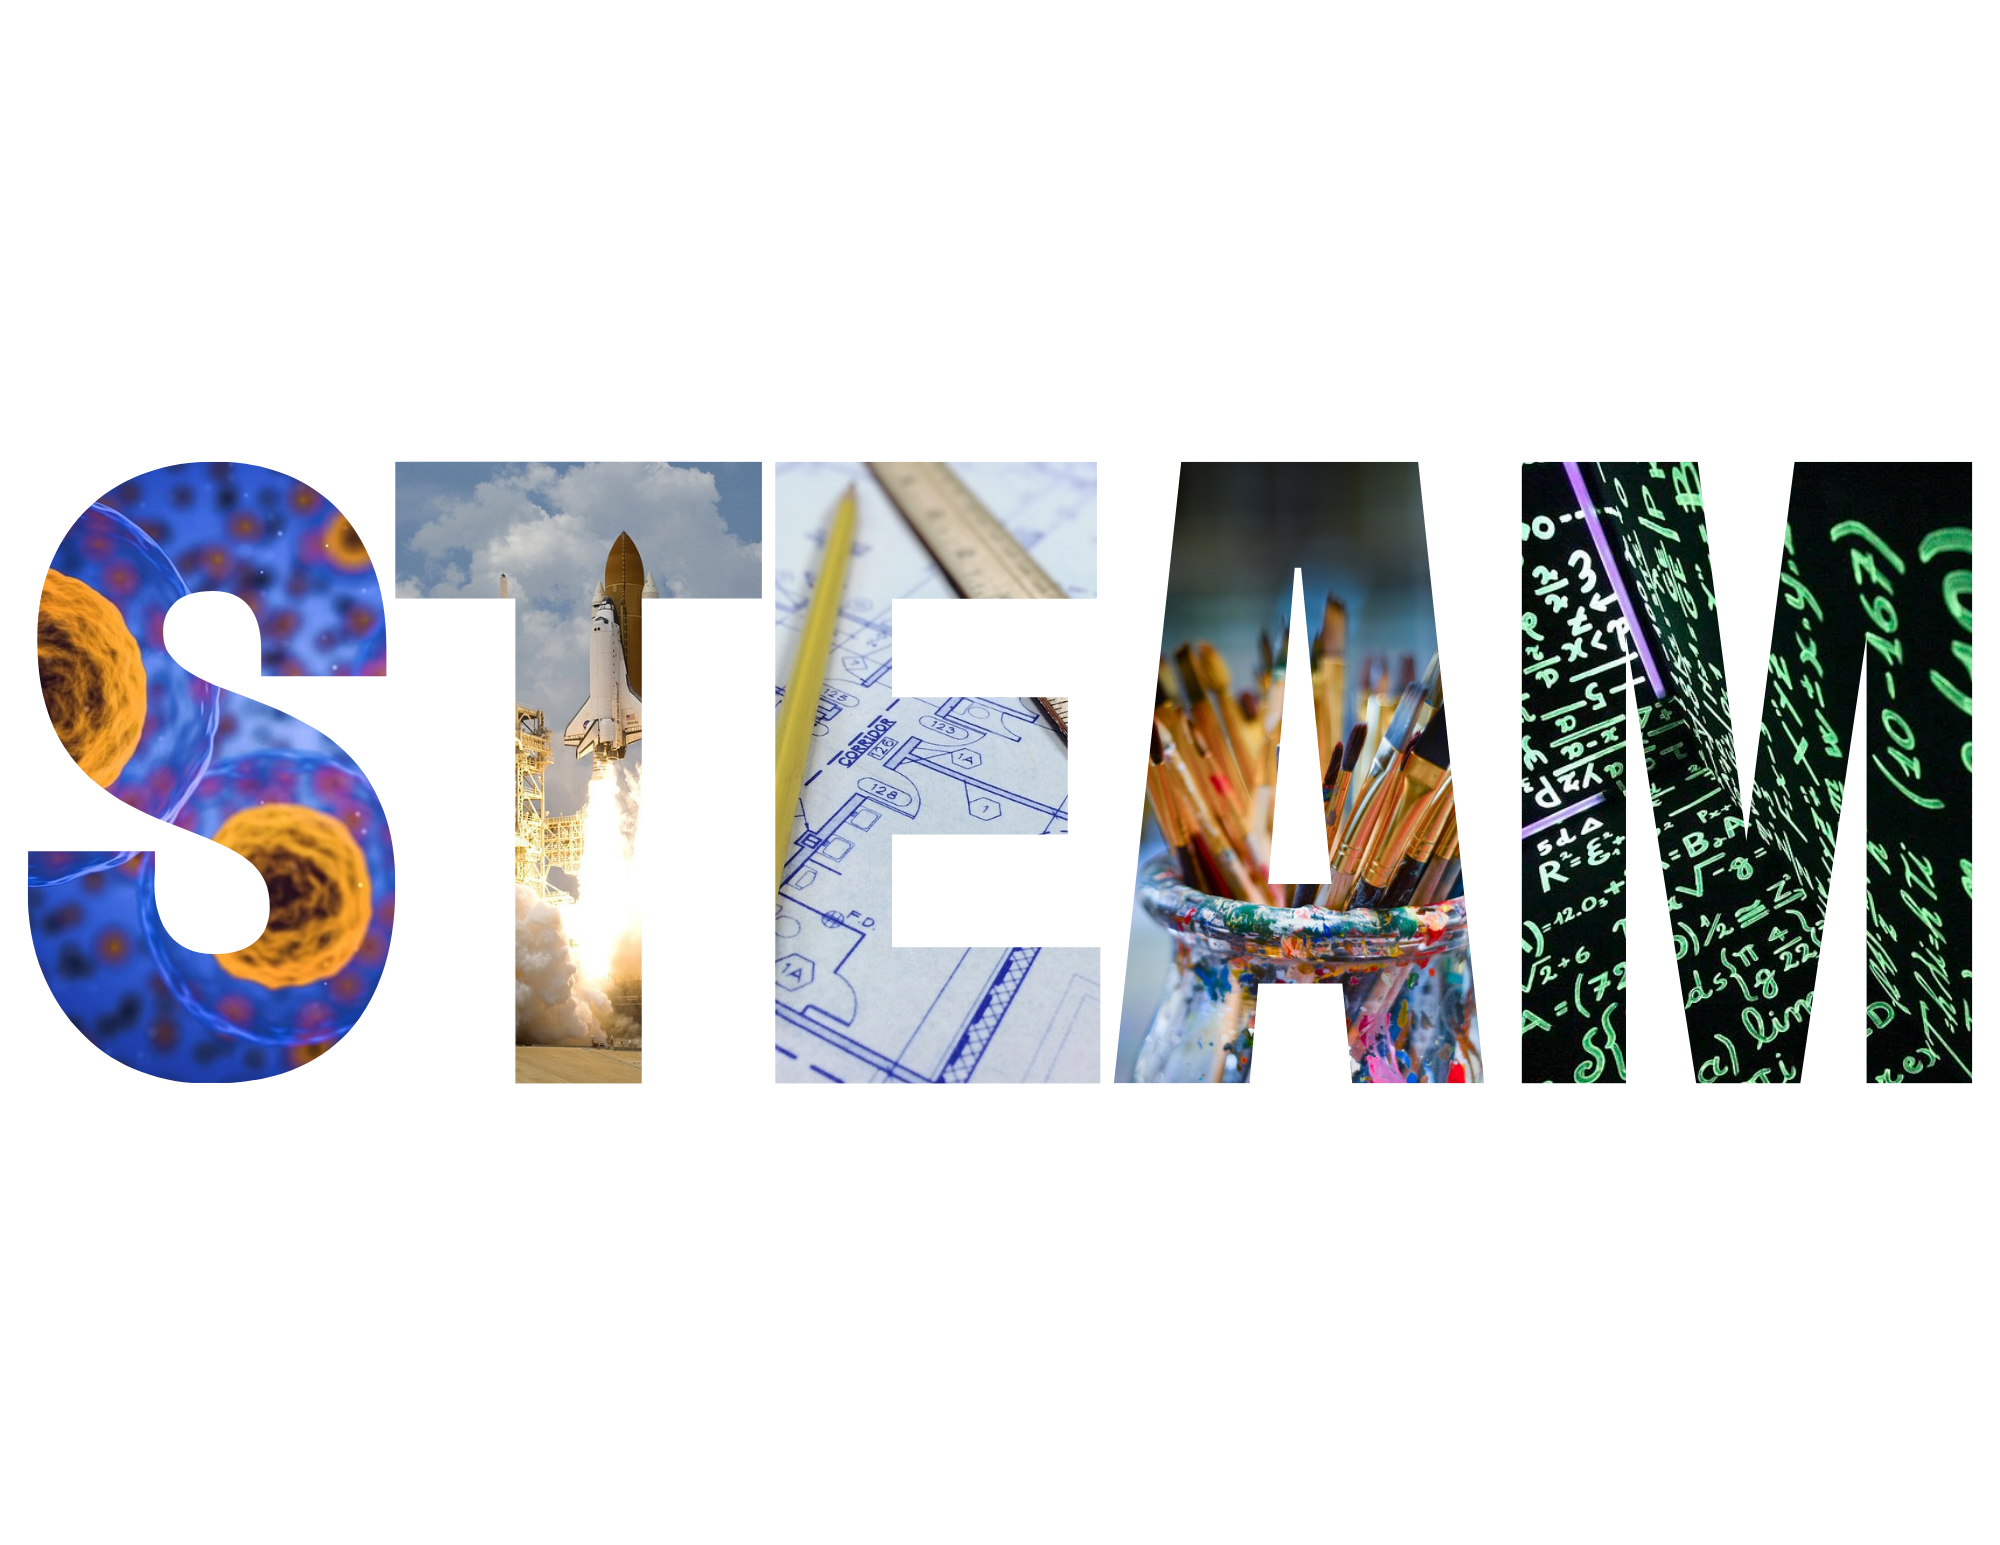 An image depicting the acronym "STEAM". Each letter has an image within it: S - Cells, T - NASA Rocket, E - Blueprints, A - Paintbrushes, M - Mathematical Equations.